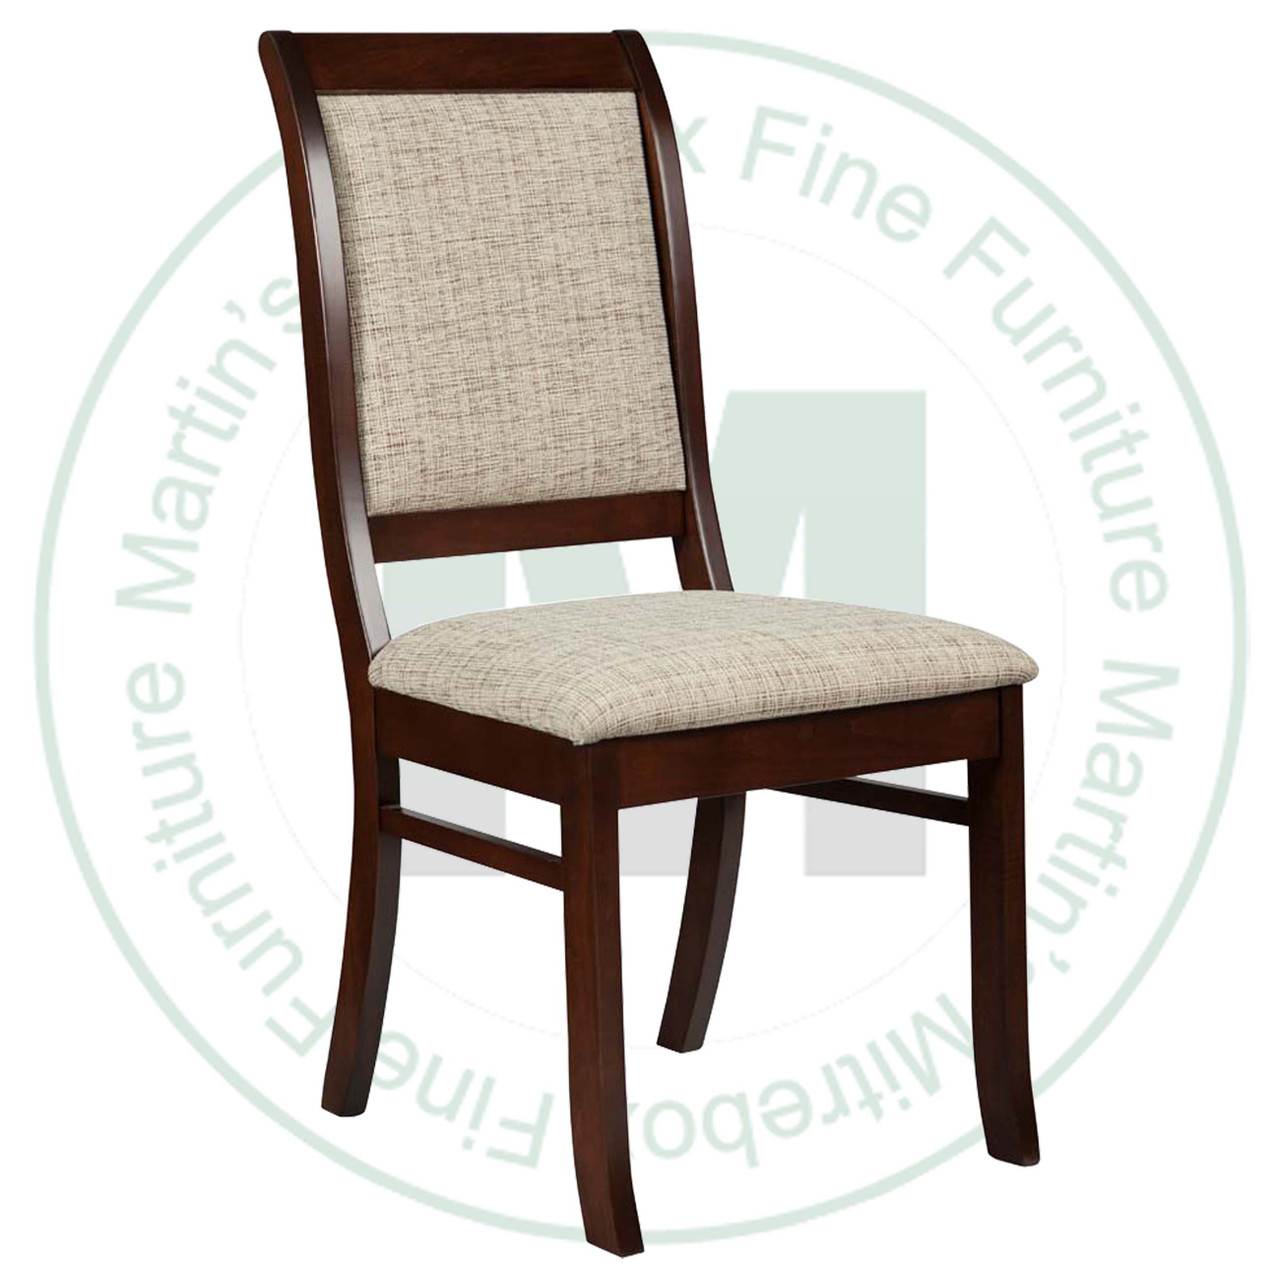 Maple Elizabeth Side Chair With Leather Seat And Back